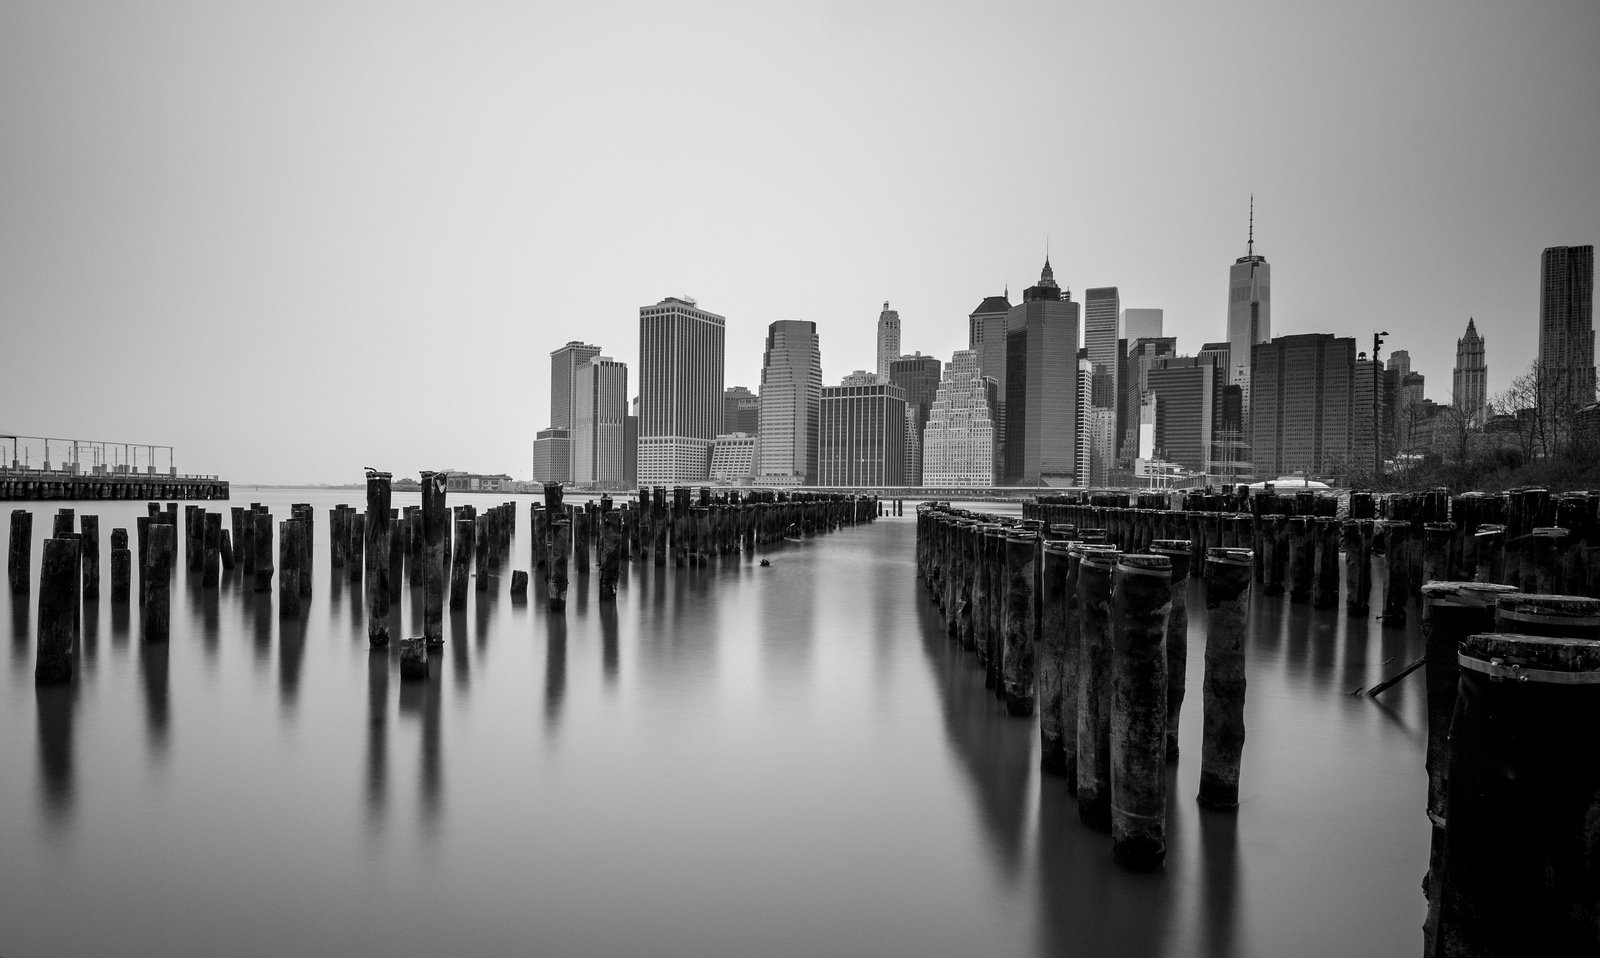 Architecture bay black buildings cities clouds nyc rivers sky water world new York big apple wallpaperx958